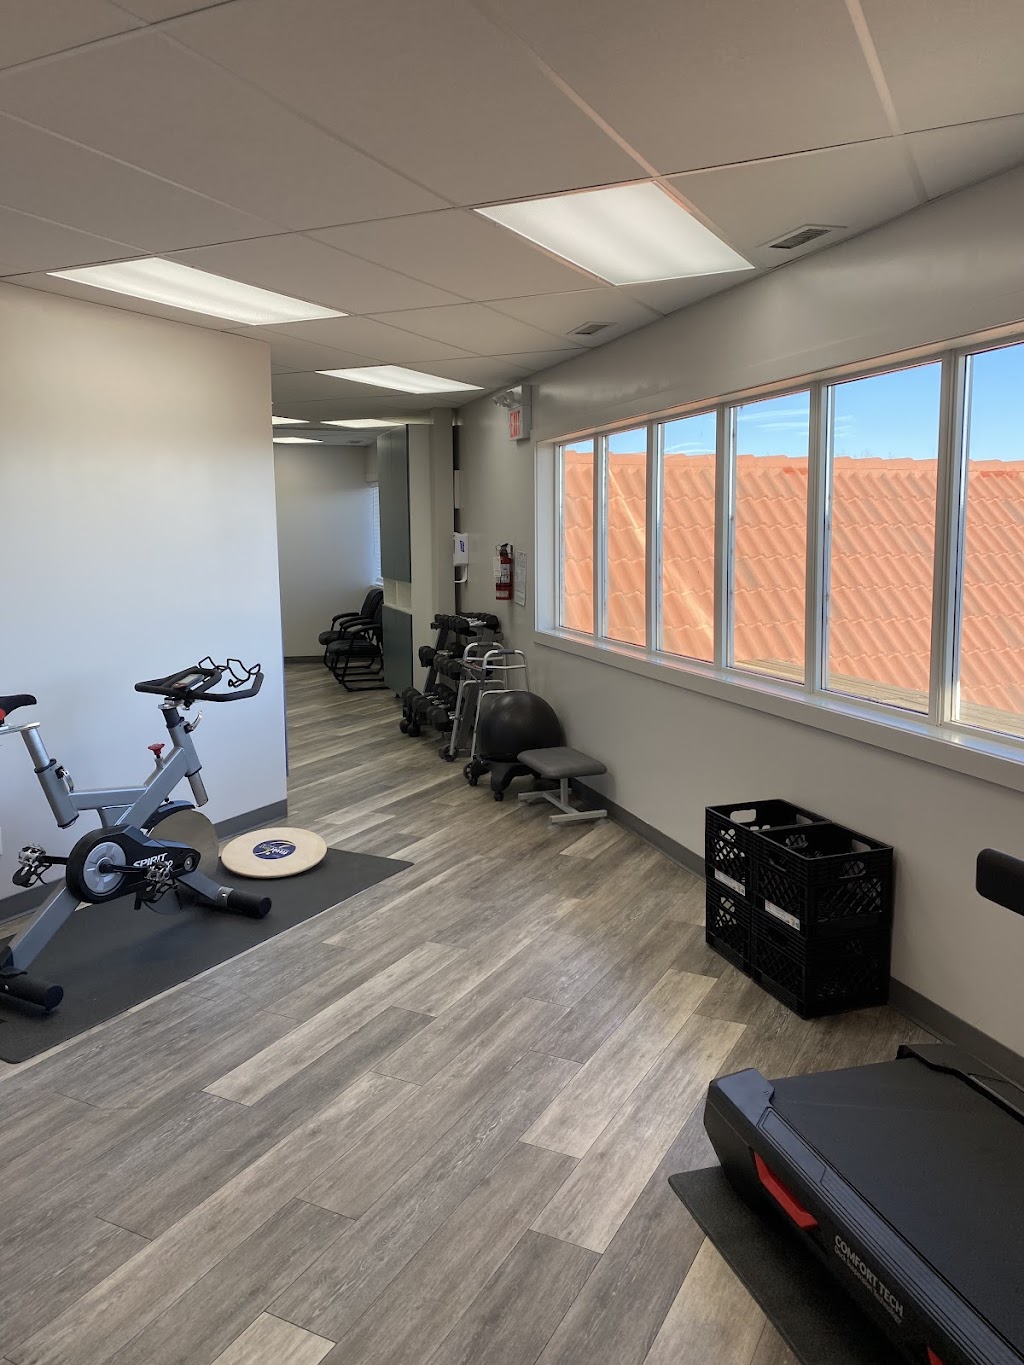 Strive Physiotherapy | 300 Merganser Drive West Unit 203, 2nd floor, Chestermere, AB T1X 1L6, Canada | Phone: (403) 235-3343